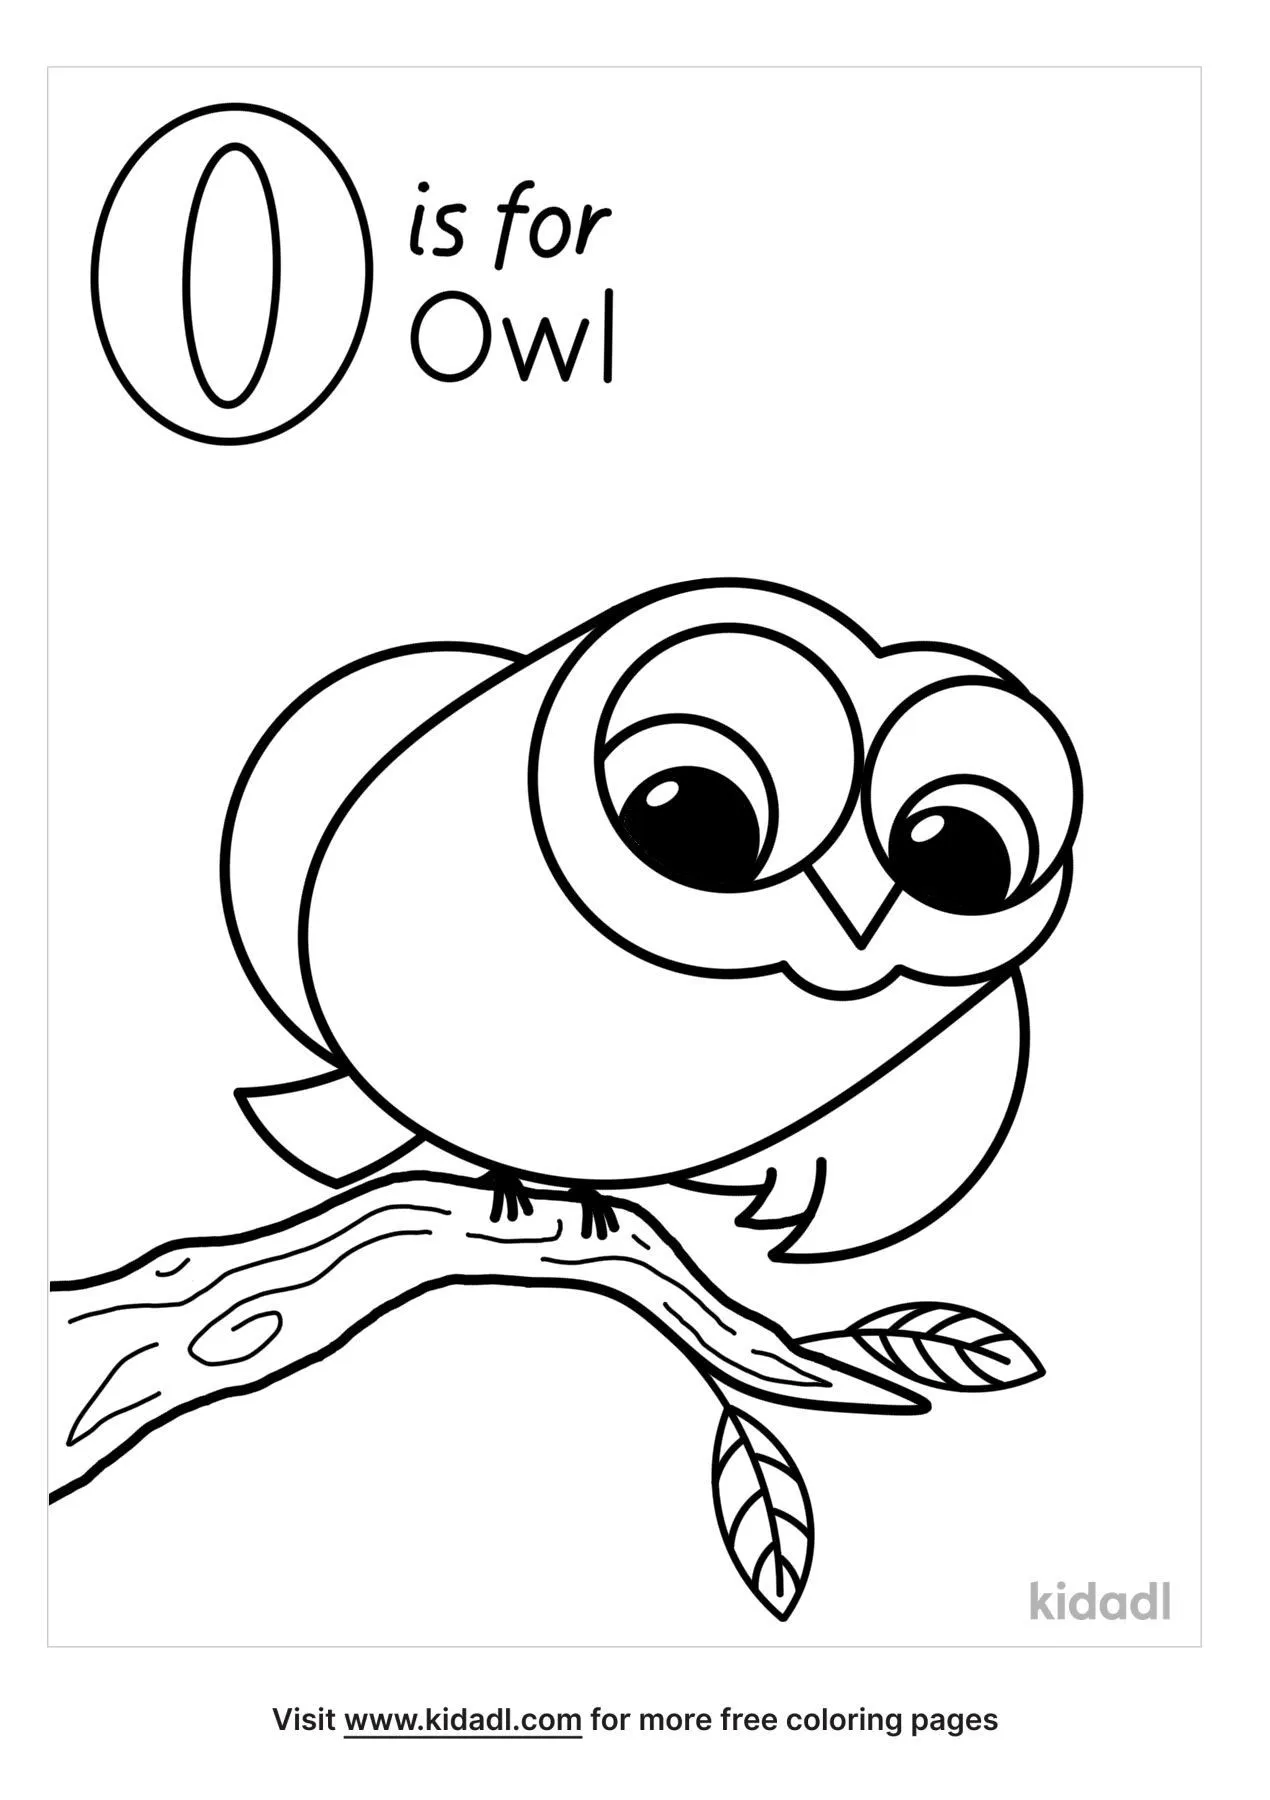 Free Animal That Starts With The Letter O Coloring Page | Coloring Page  Printables | Kidadl